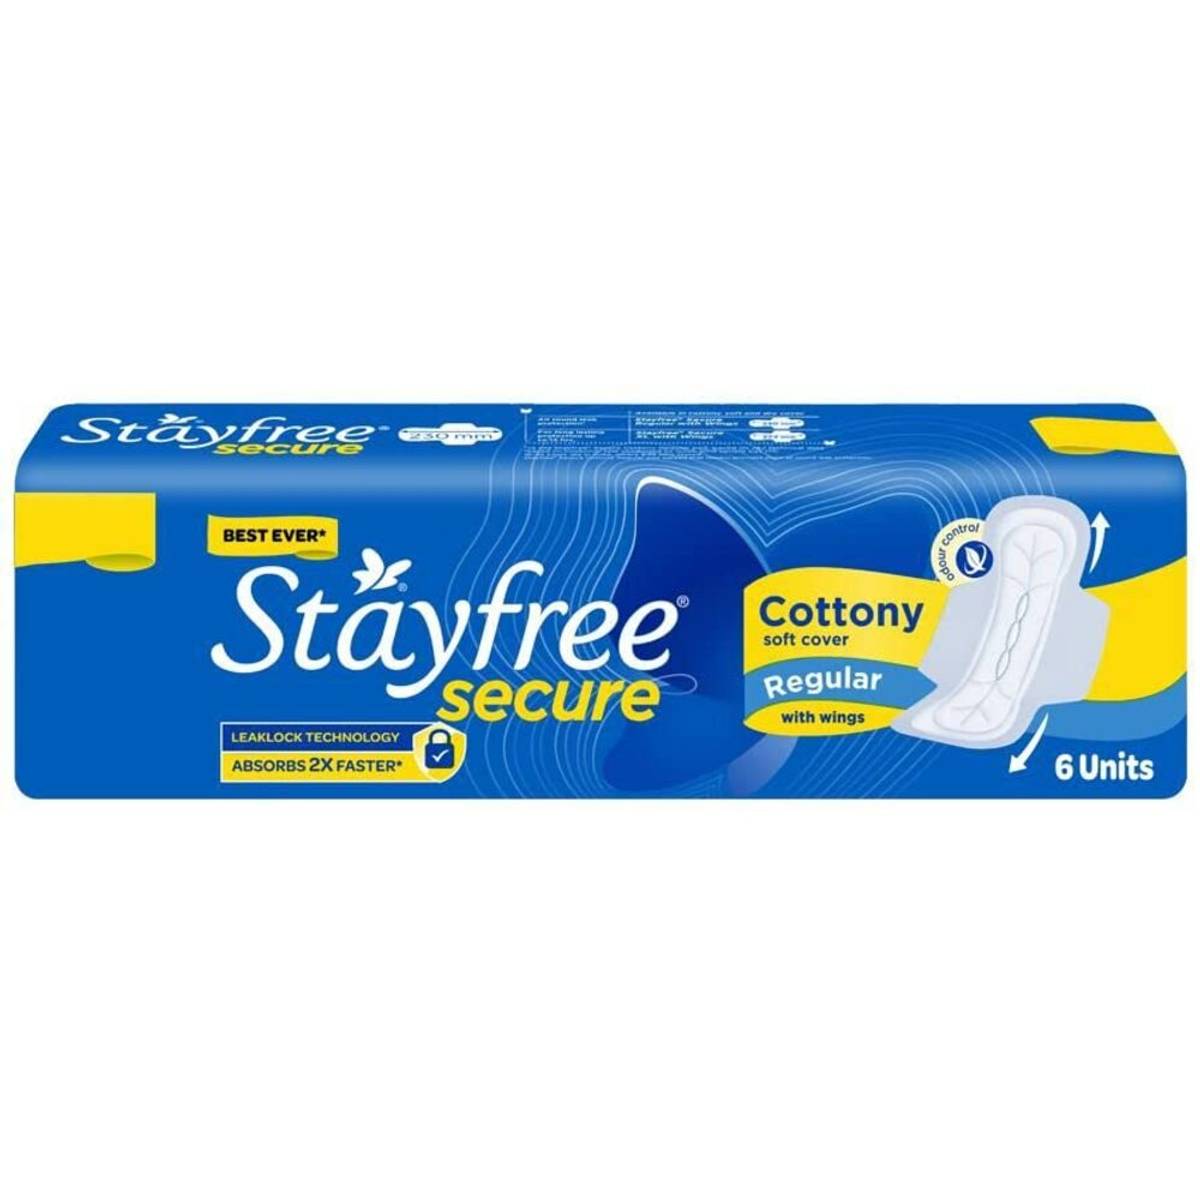 Stayfree Secure Cottony Soft Sanitary Pads- Regular(6 Pads)